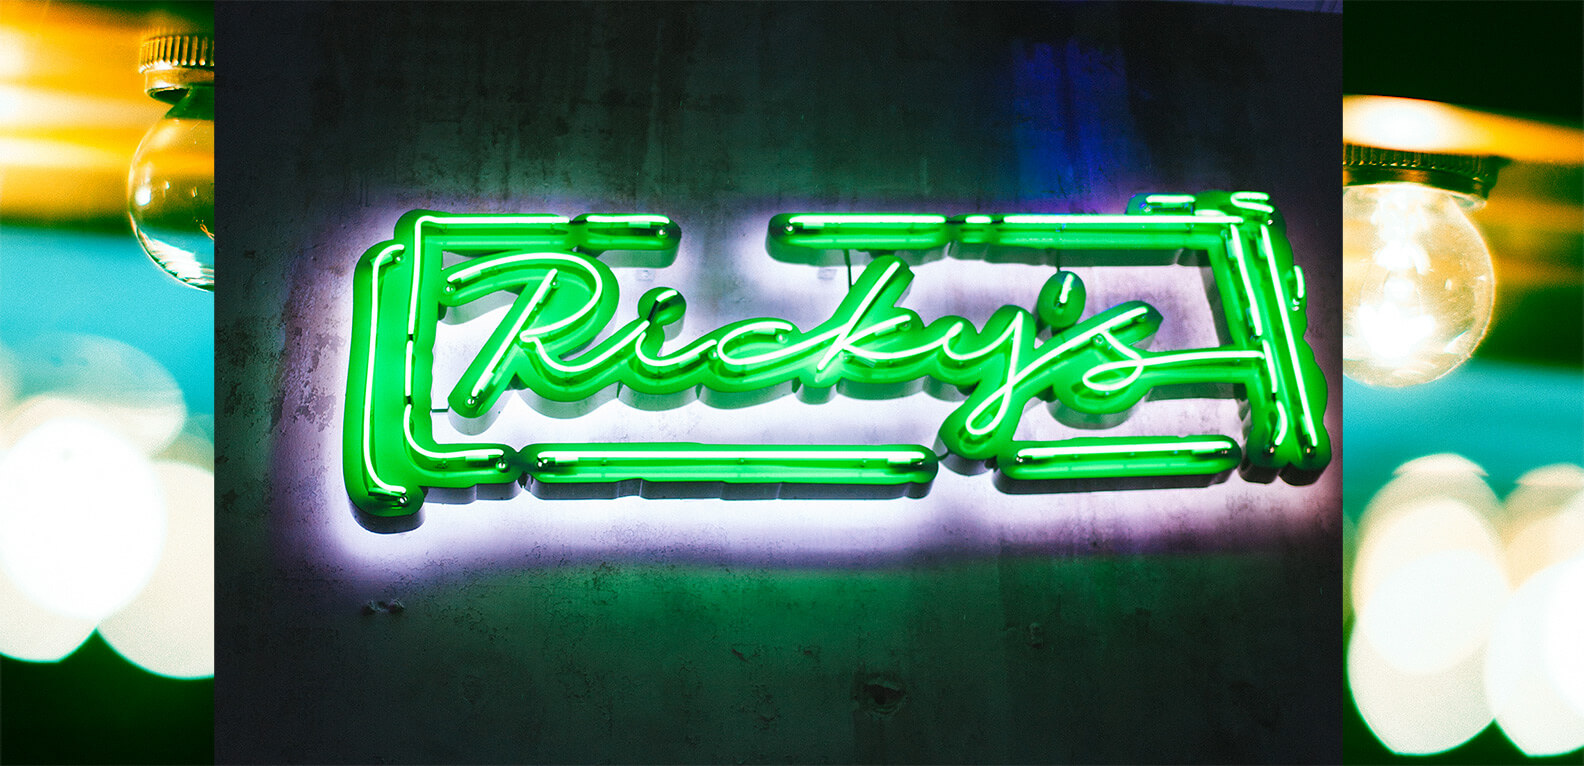 Ricky's branding neon sign by Jacober Creative